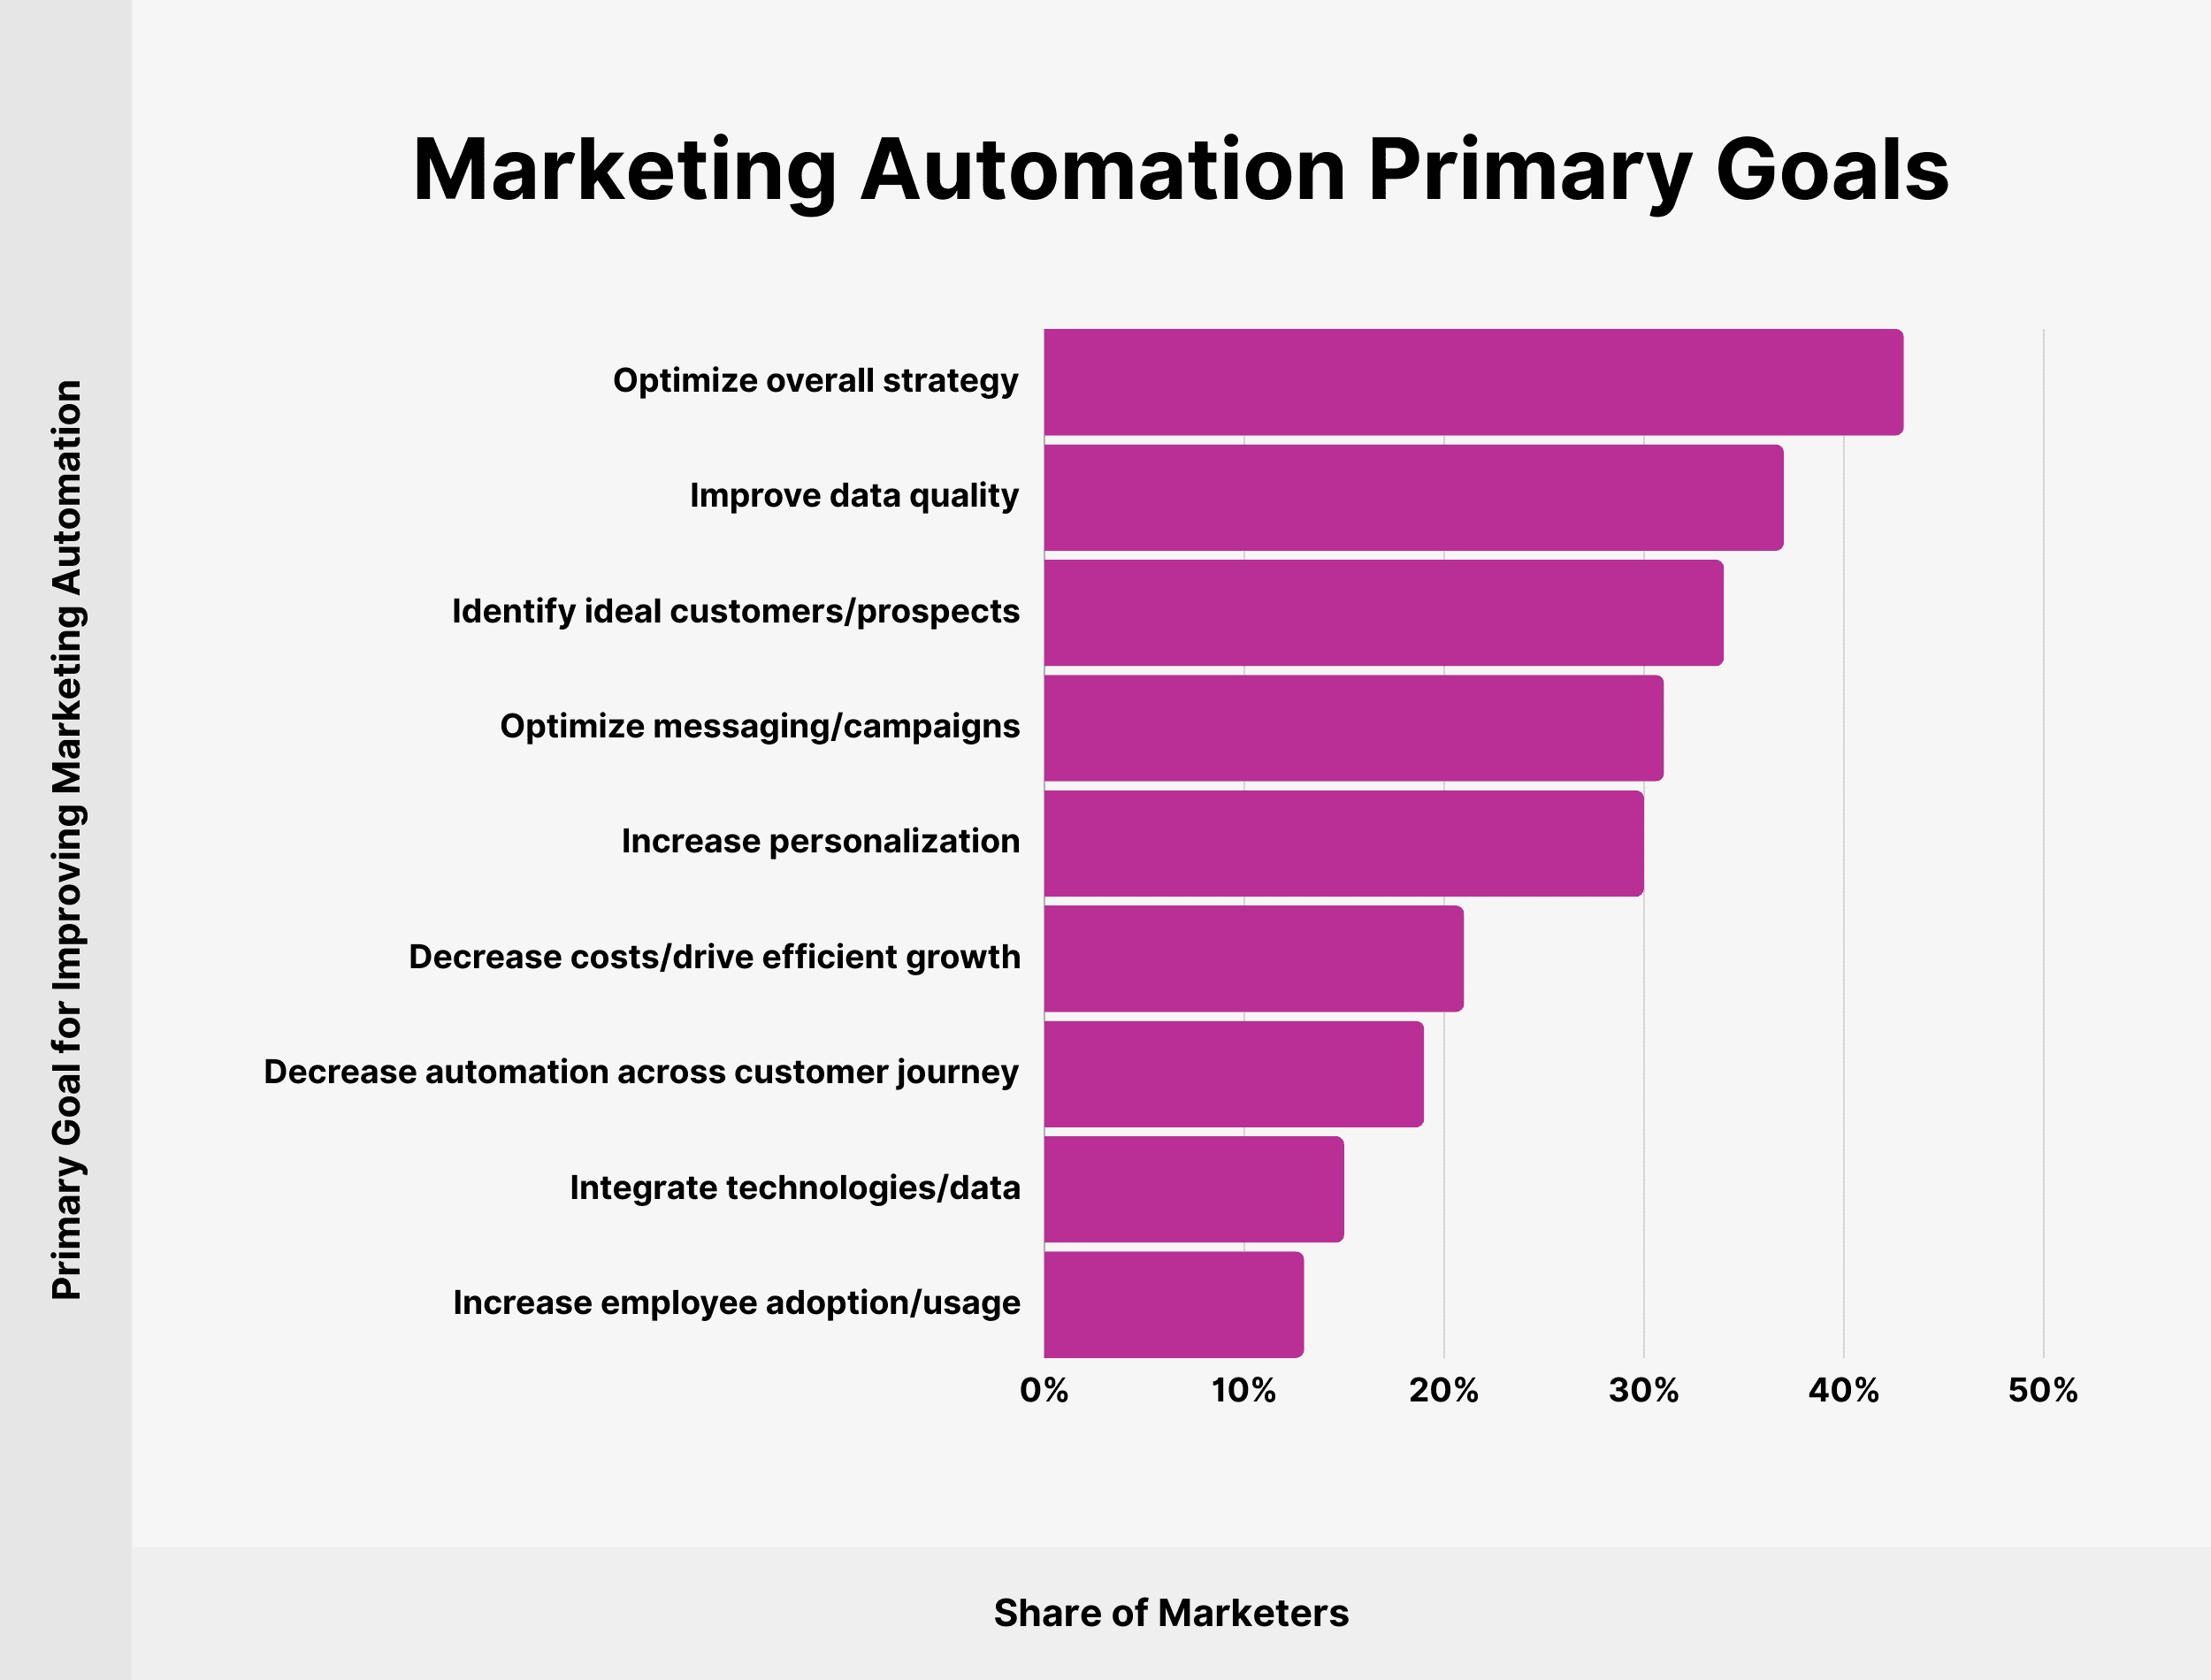 Marketing Automation Primary Goals